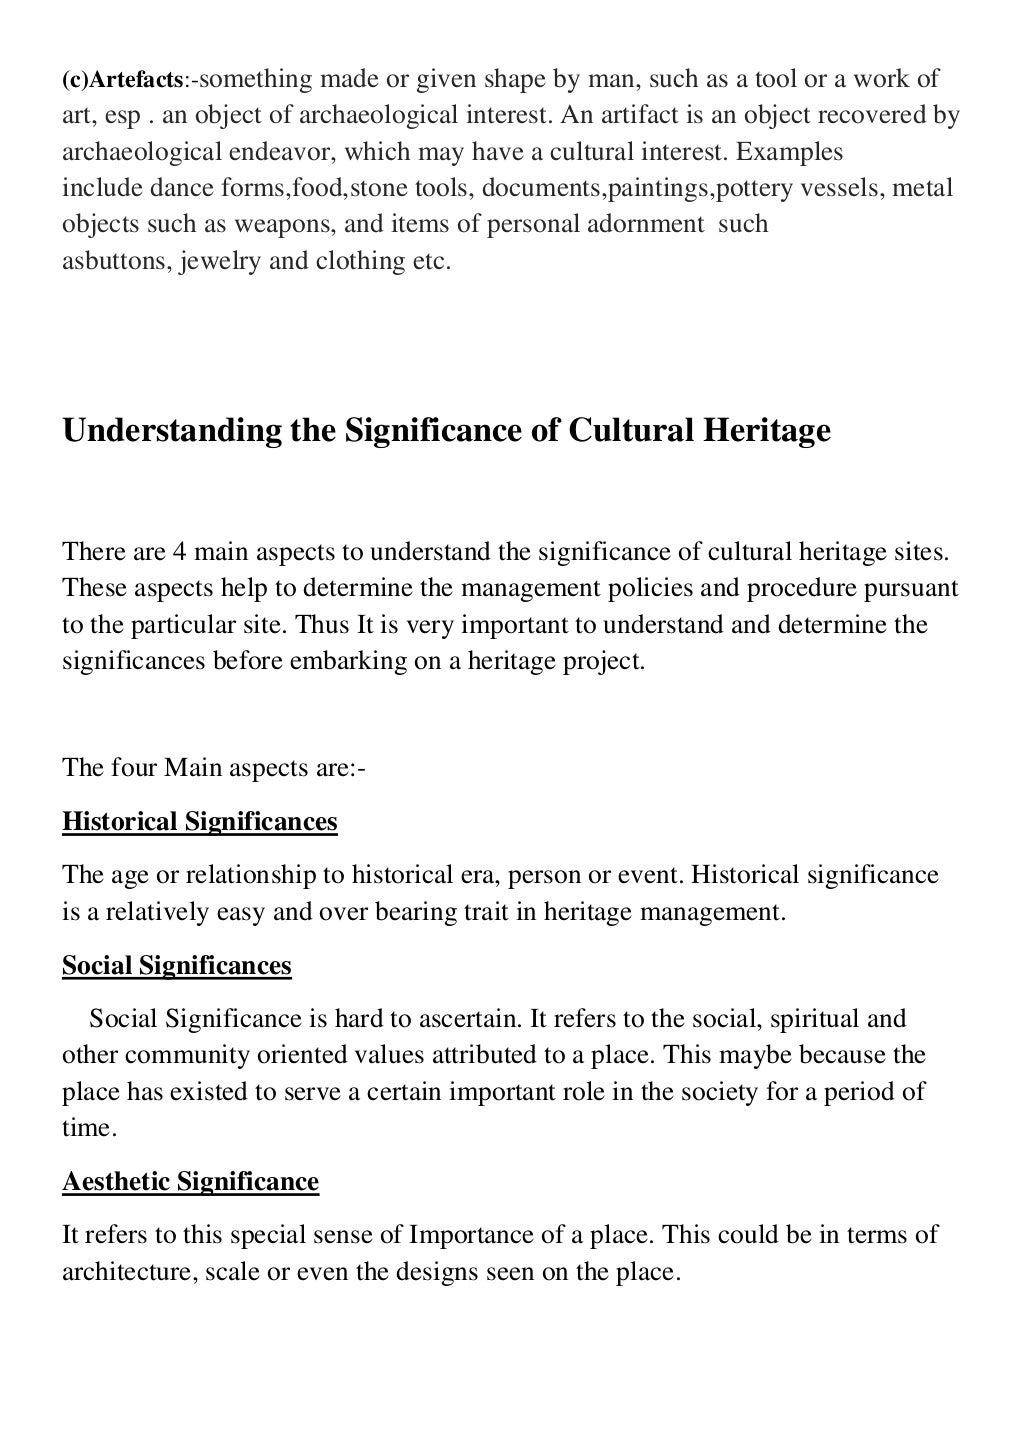 Cultural heritage & its importance